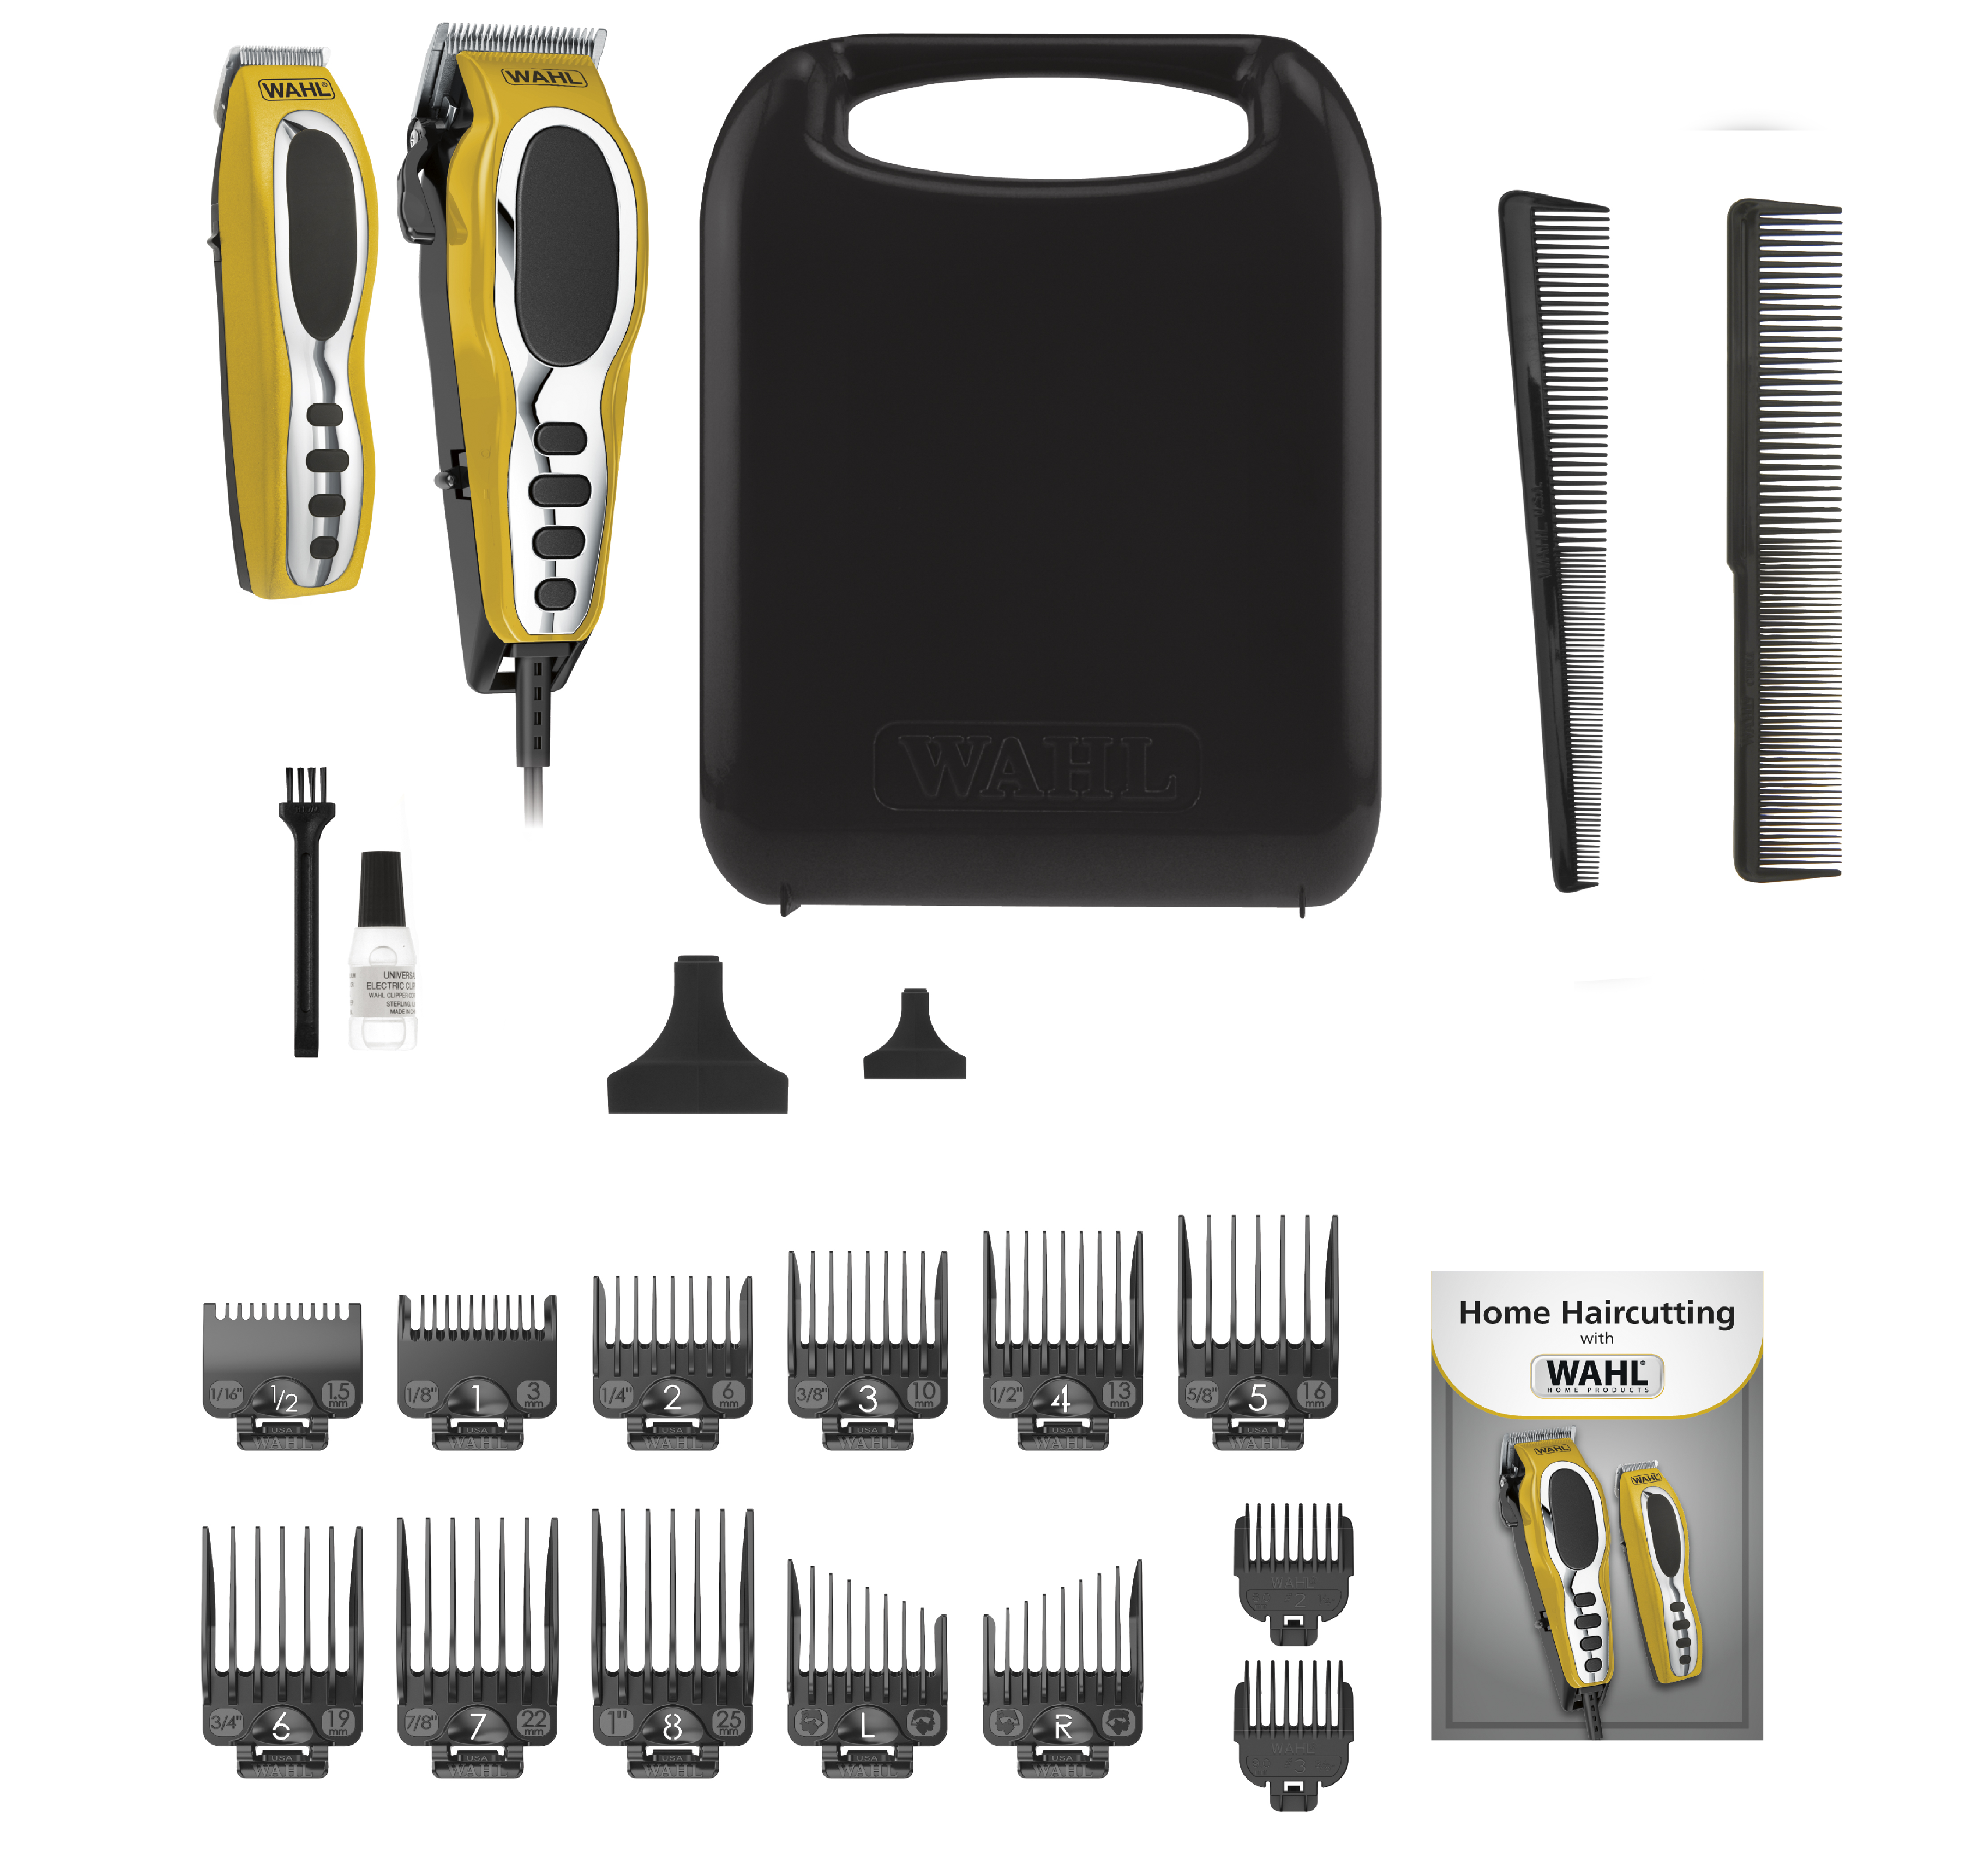 Wahl 79520-3101P Groom Pro Total Body Hair Clipper Grooming Kit, high-carbon steel blades, Yellow/Black - image 1 of 10